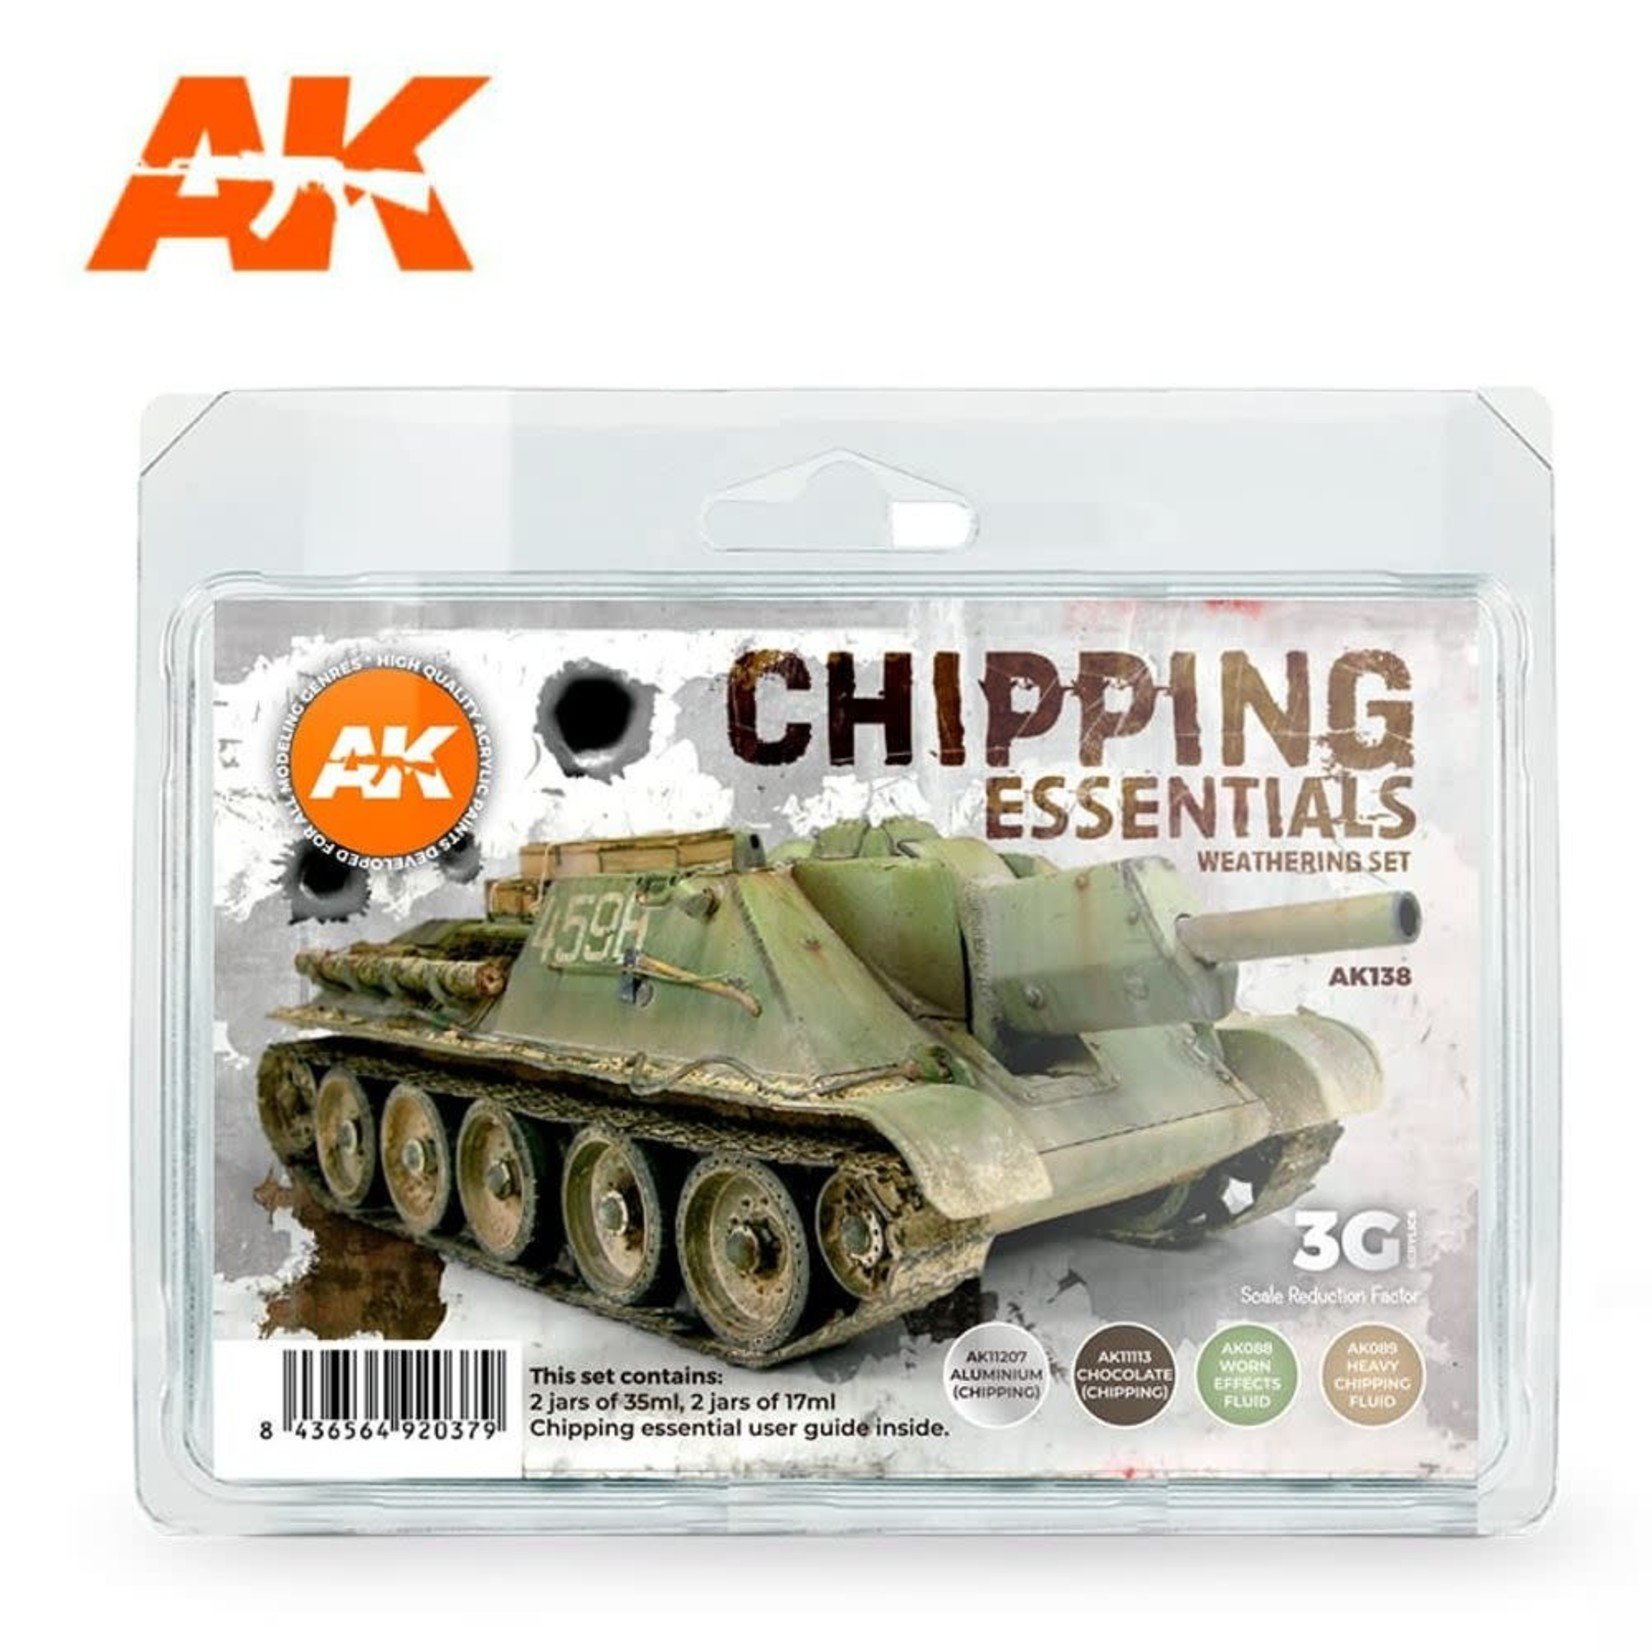 AK Interactive Chipping Essentials Weathering Kit